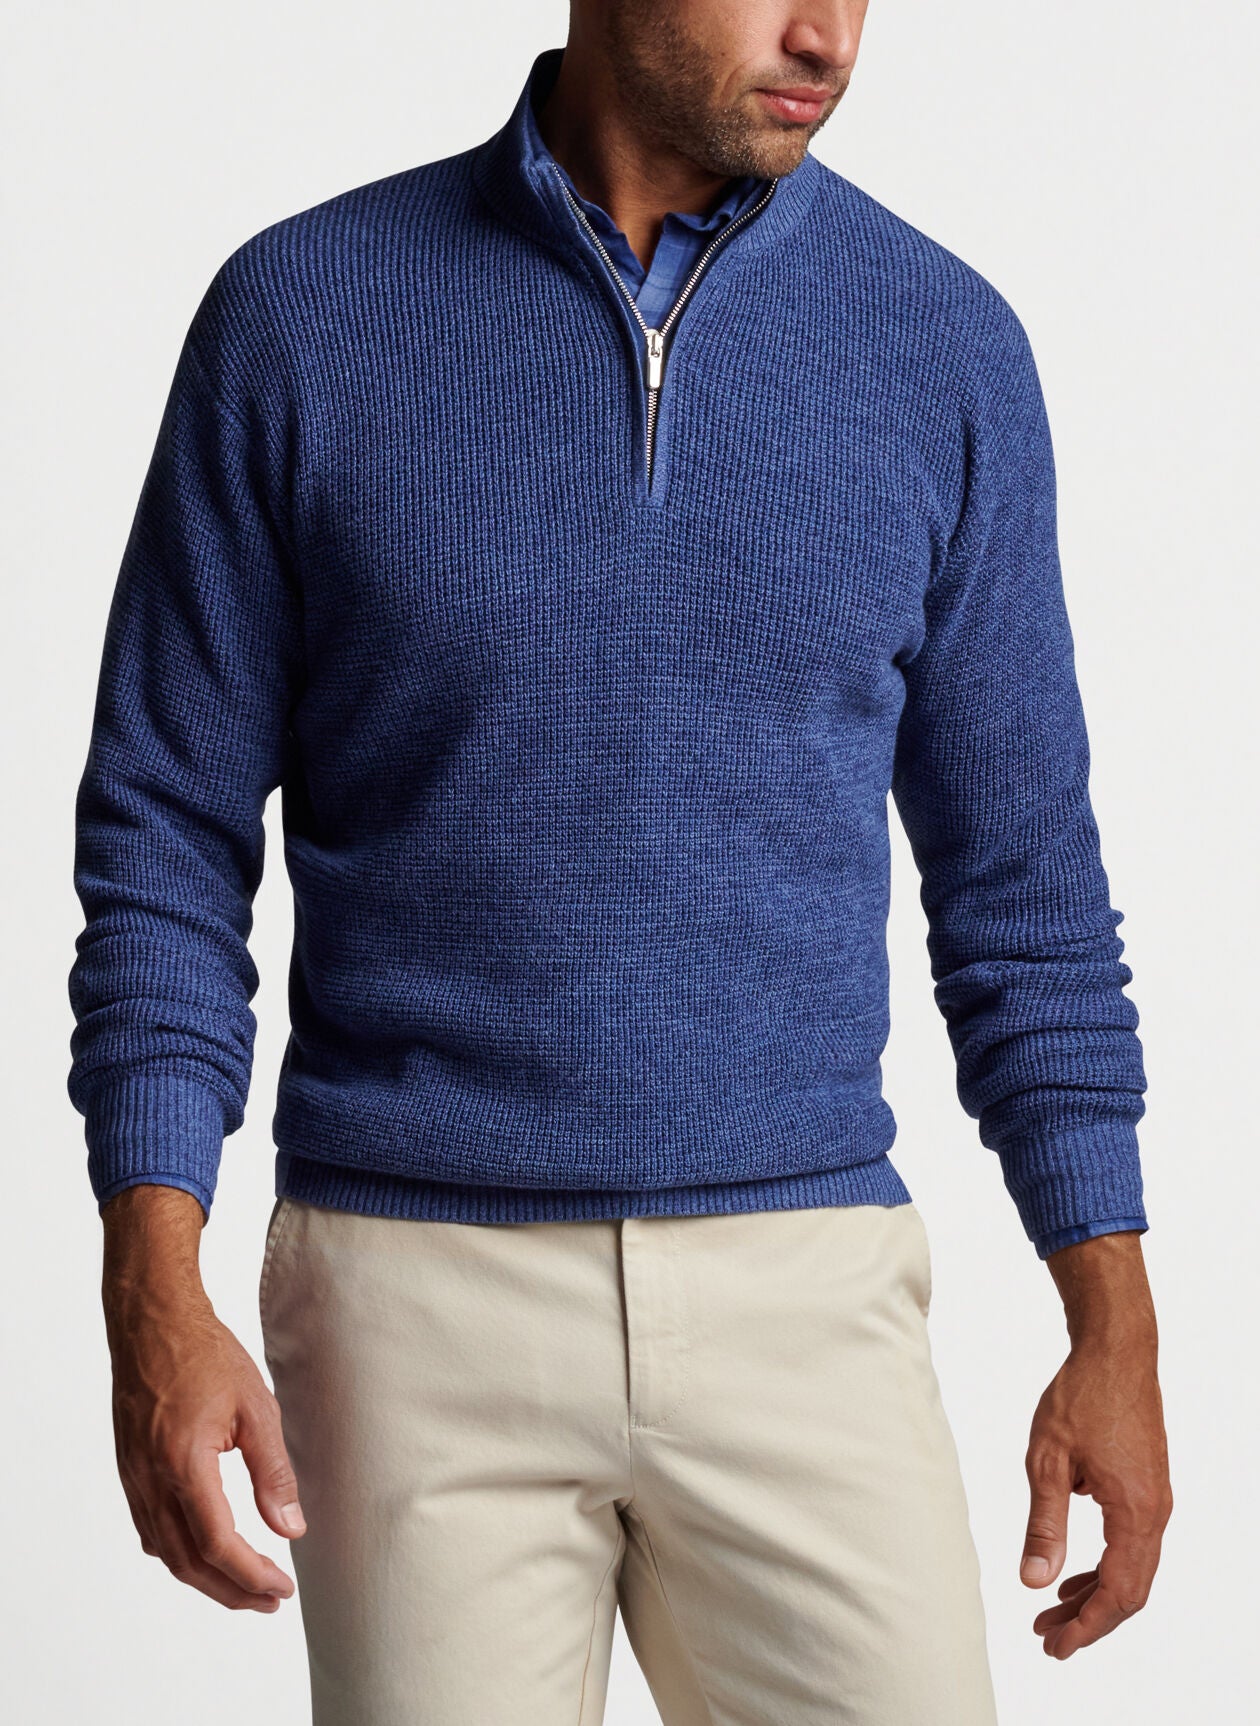 KITTS TWISTED 1/4 ZIP